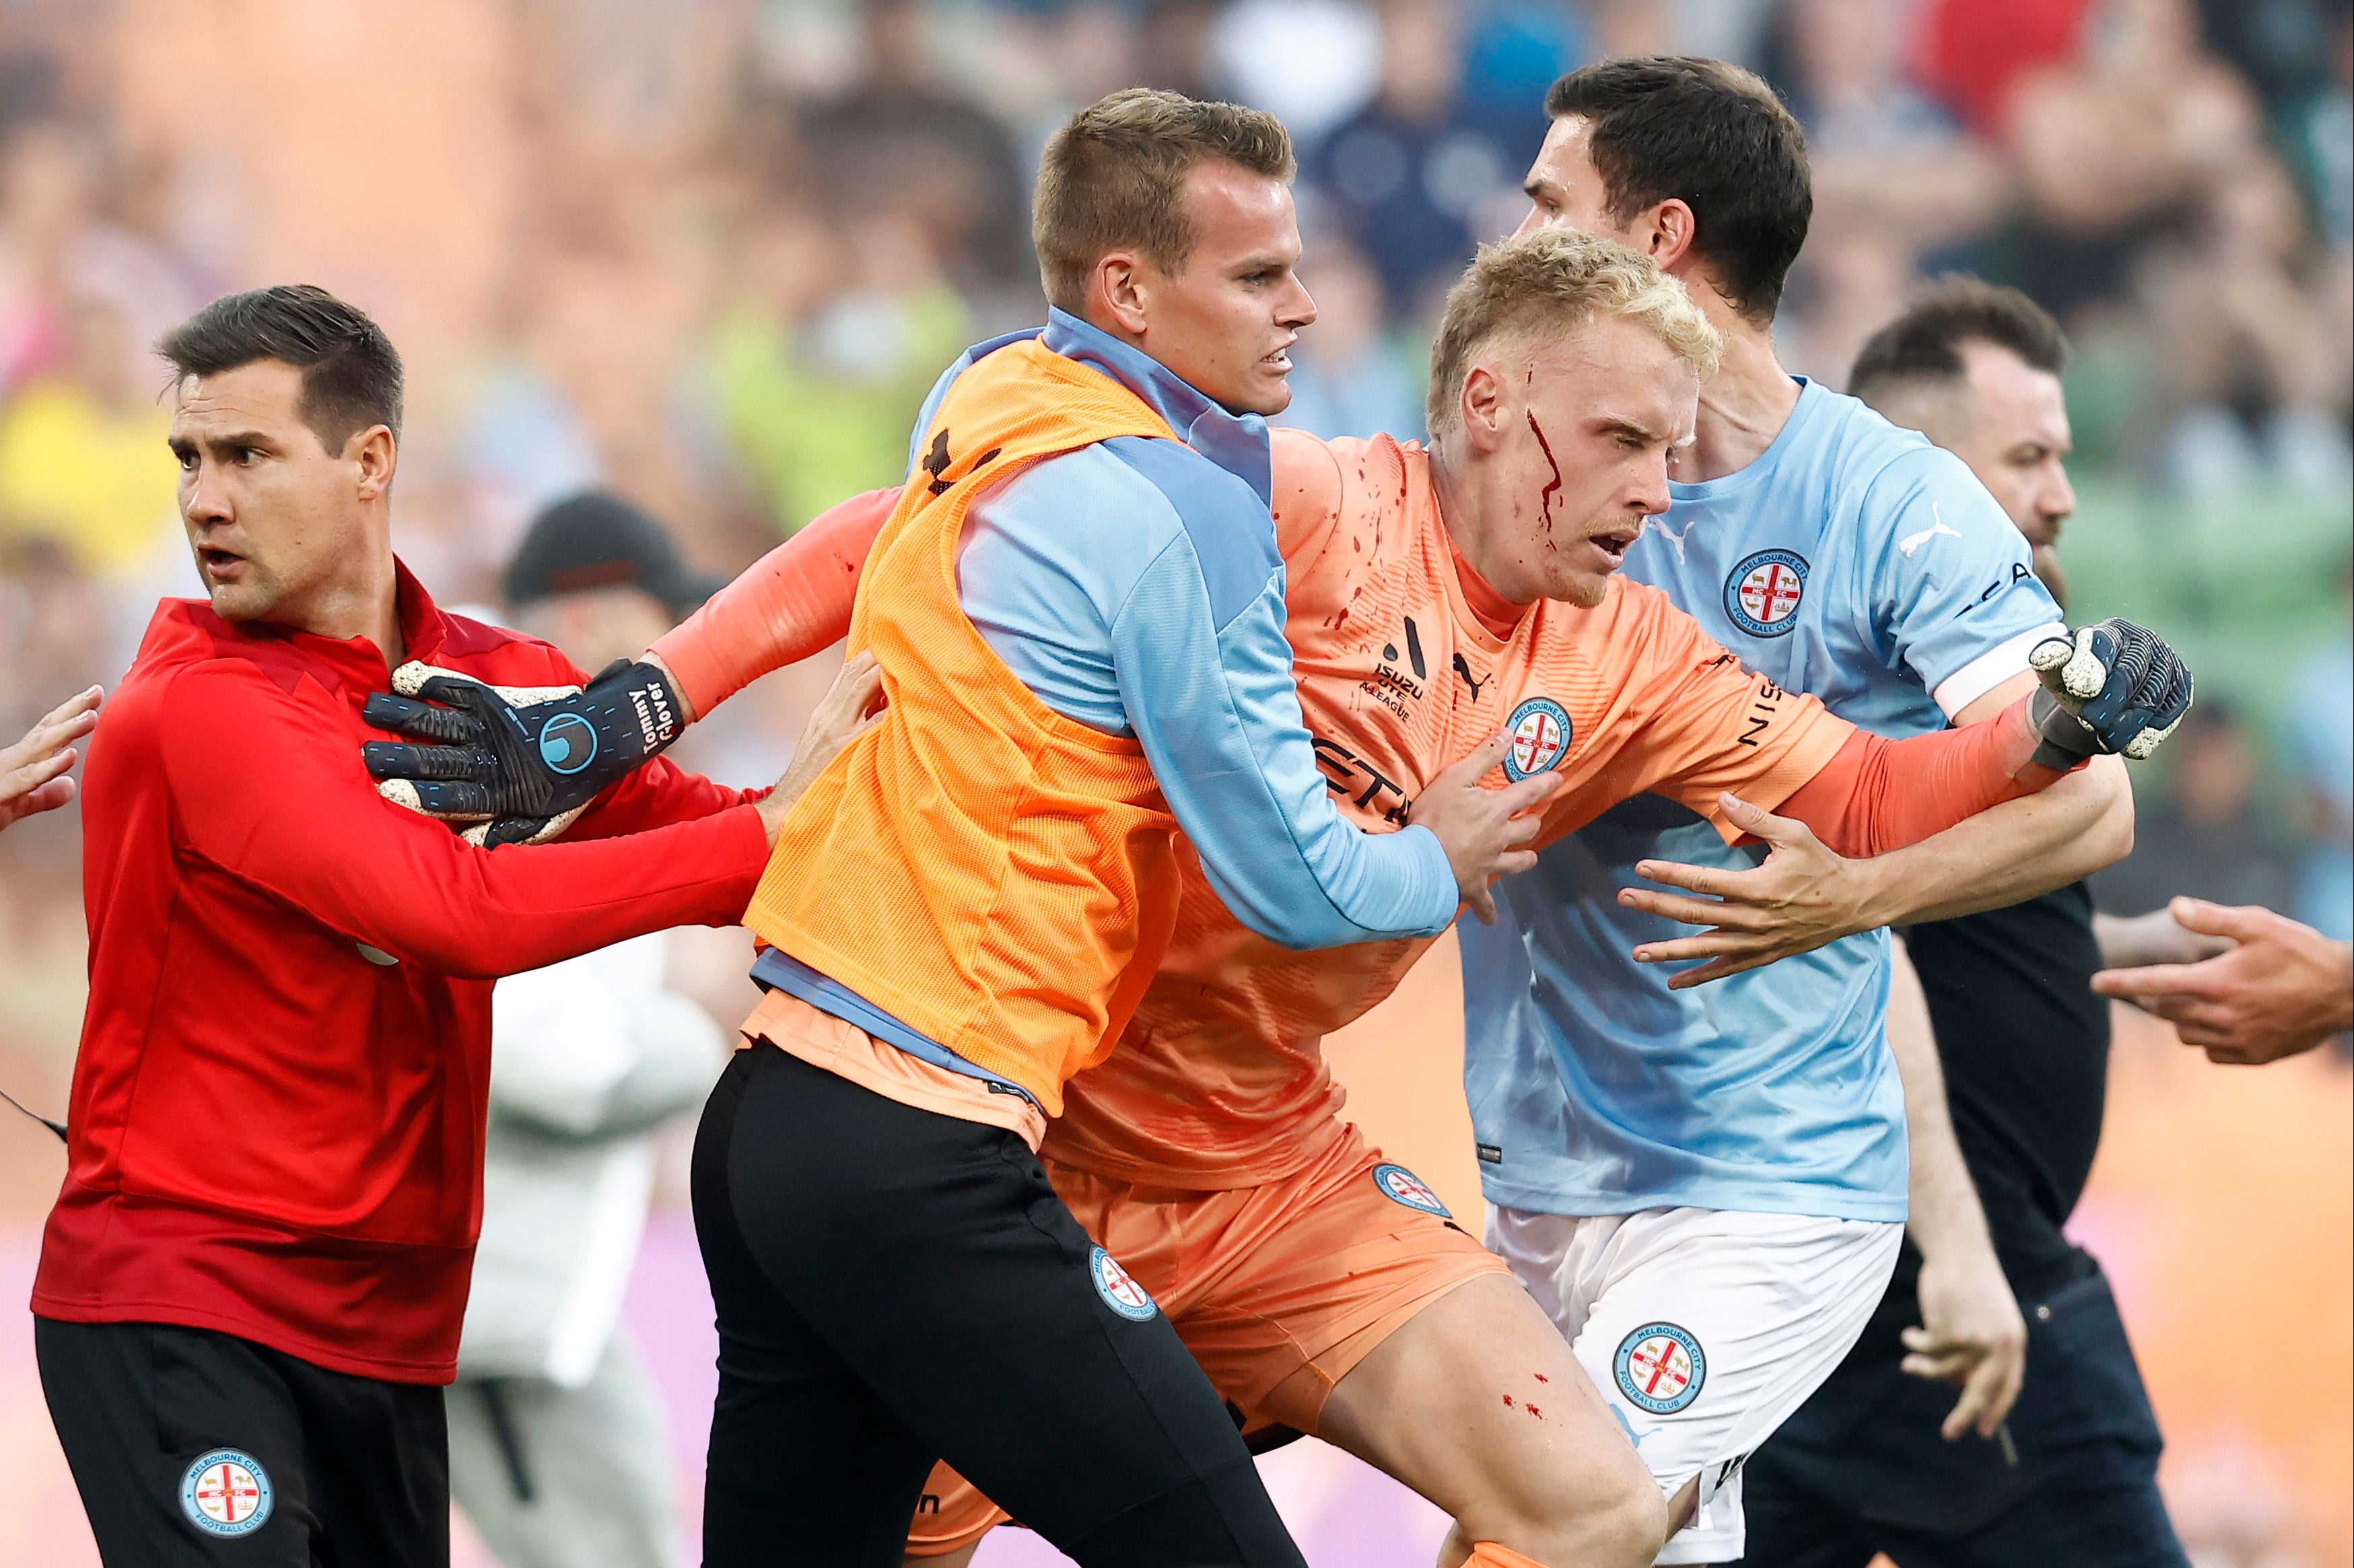 Melbourne City goalkeeper Tom Glover was left with a bloodied face after a pitch invasion during an A-League match last year